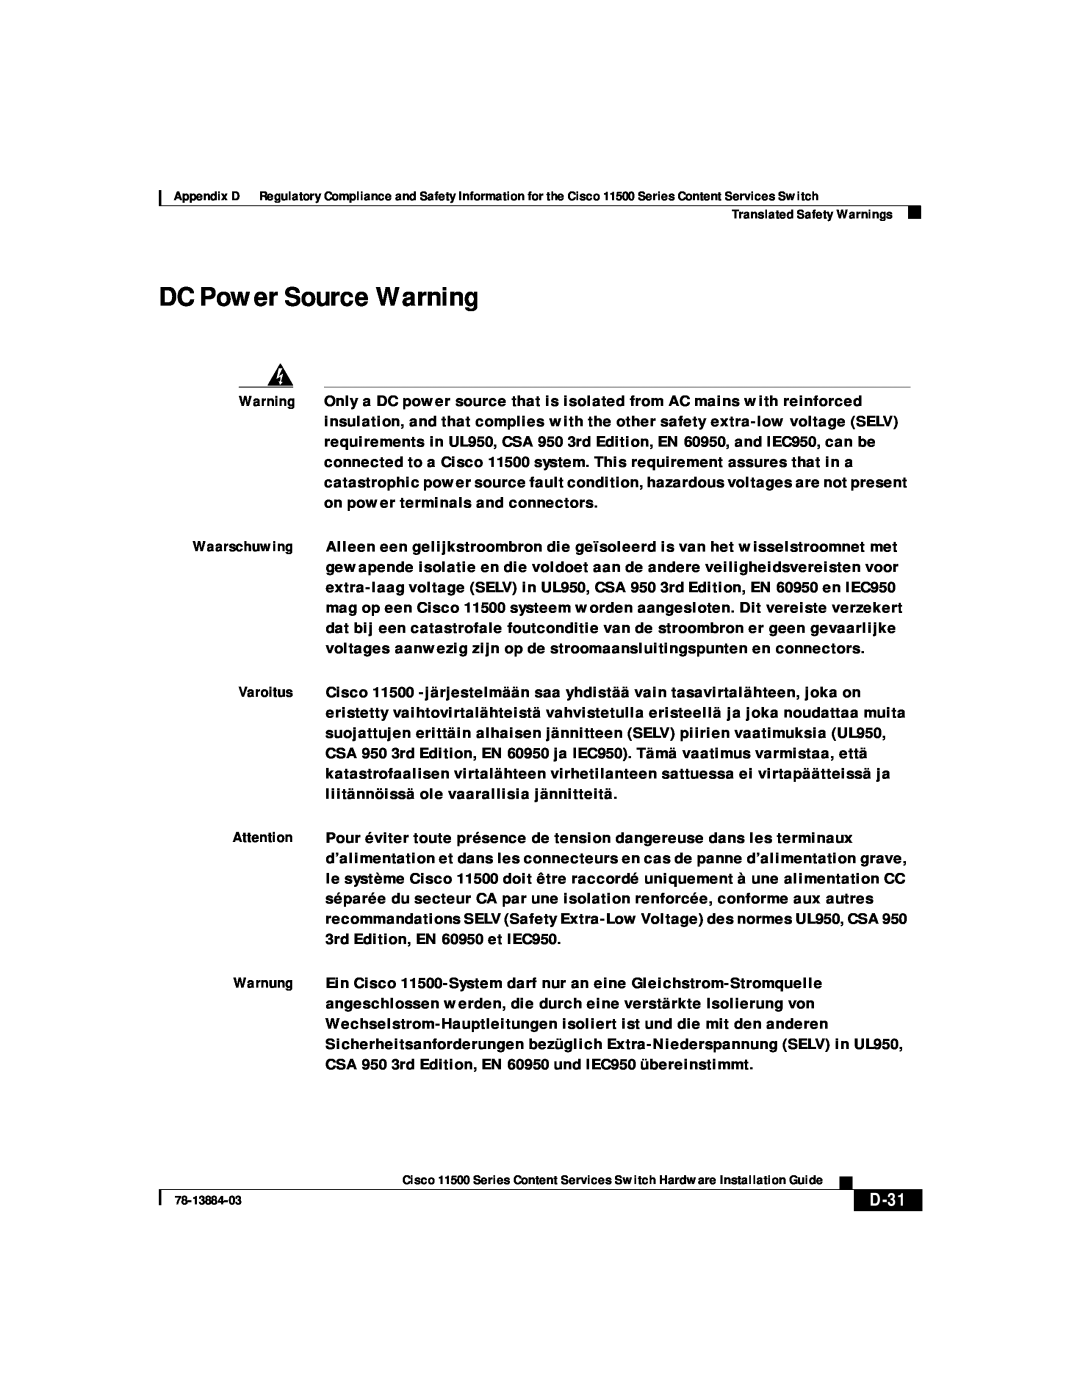 Cisco Systems 11500 Series manual DC Power Source Warning, D-31 